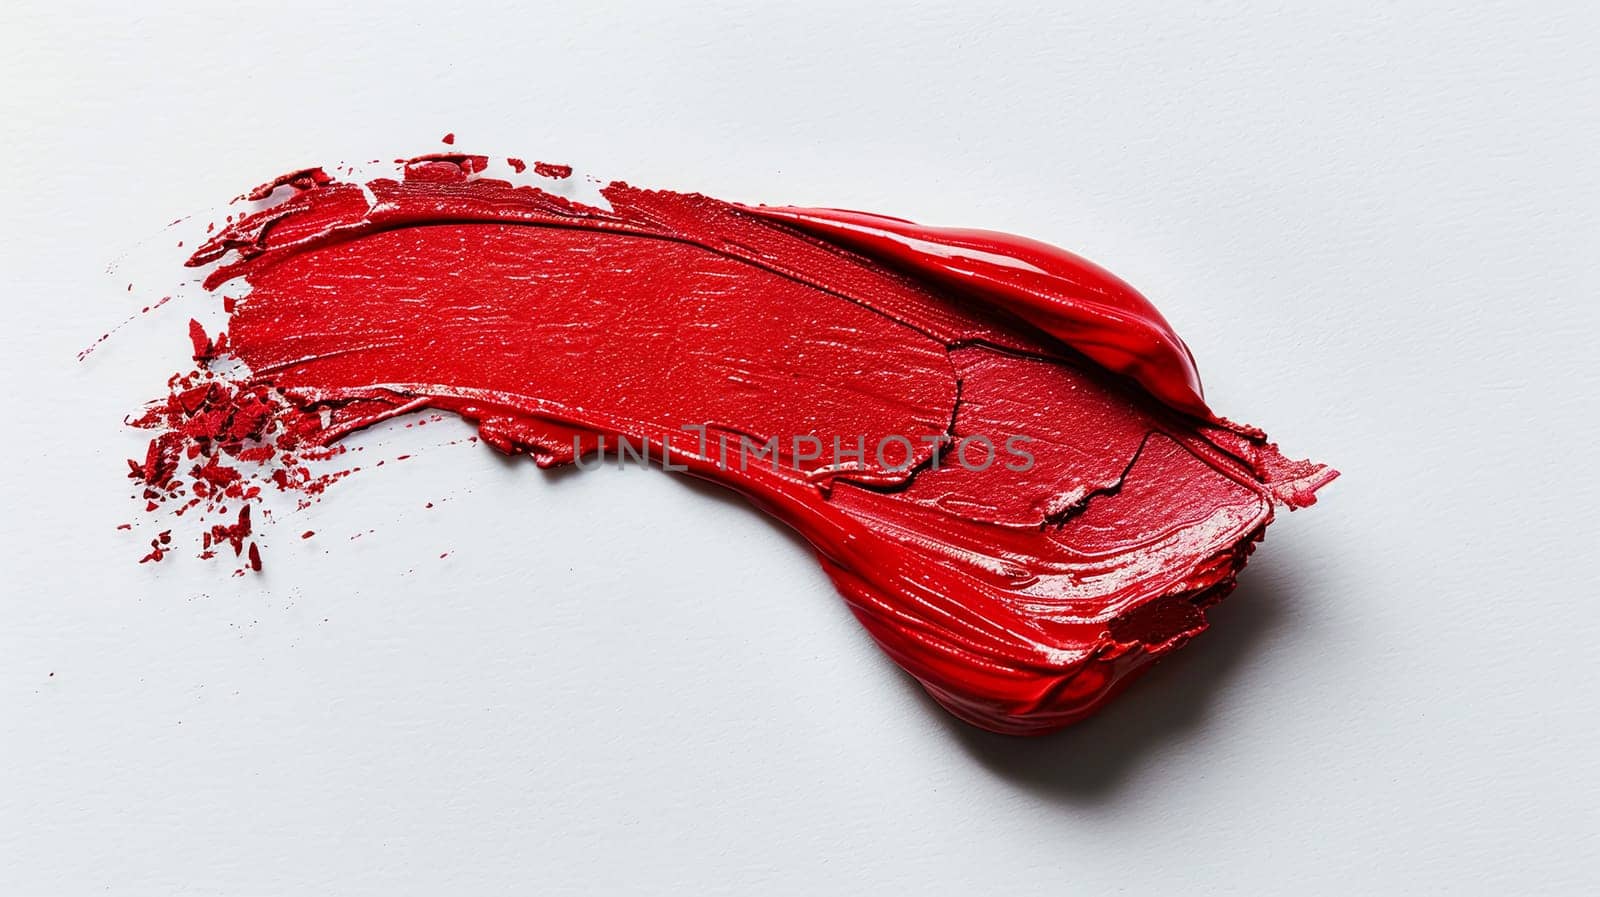 A close-up of a lipstick smudge in classic red on a pristine white surface, leaving a vivid impression.